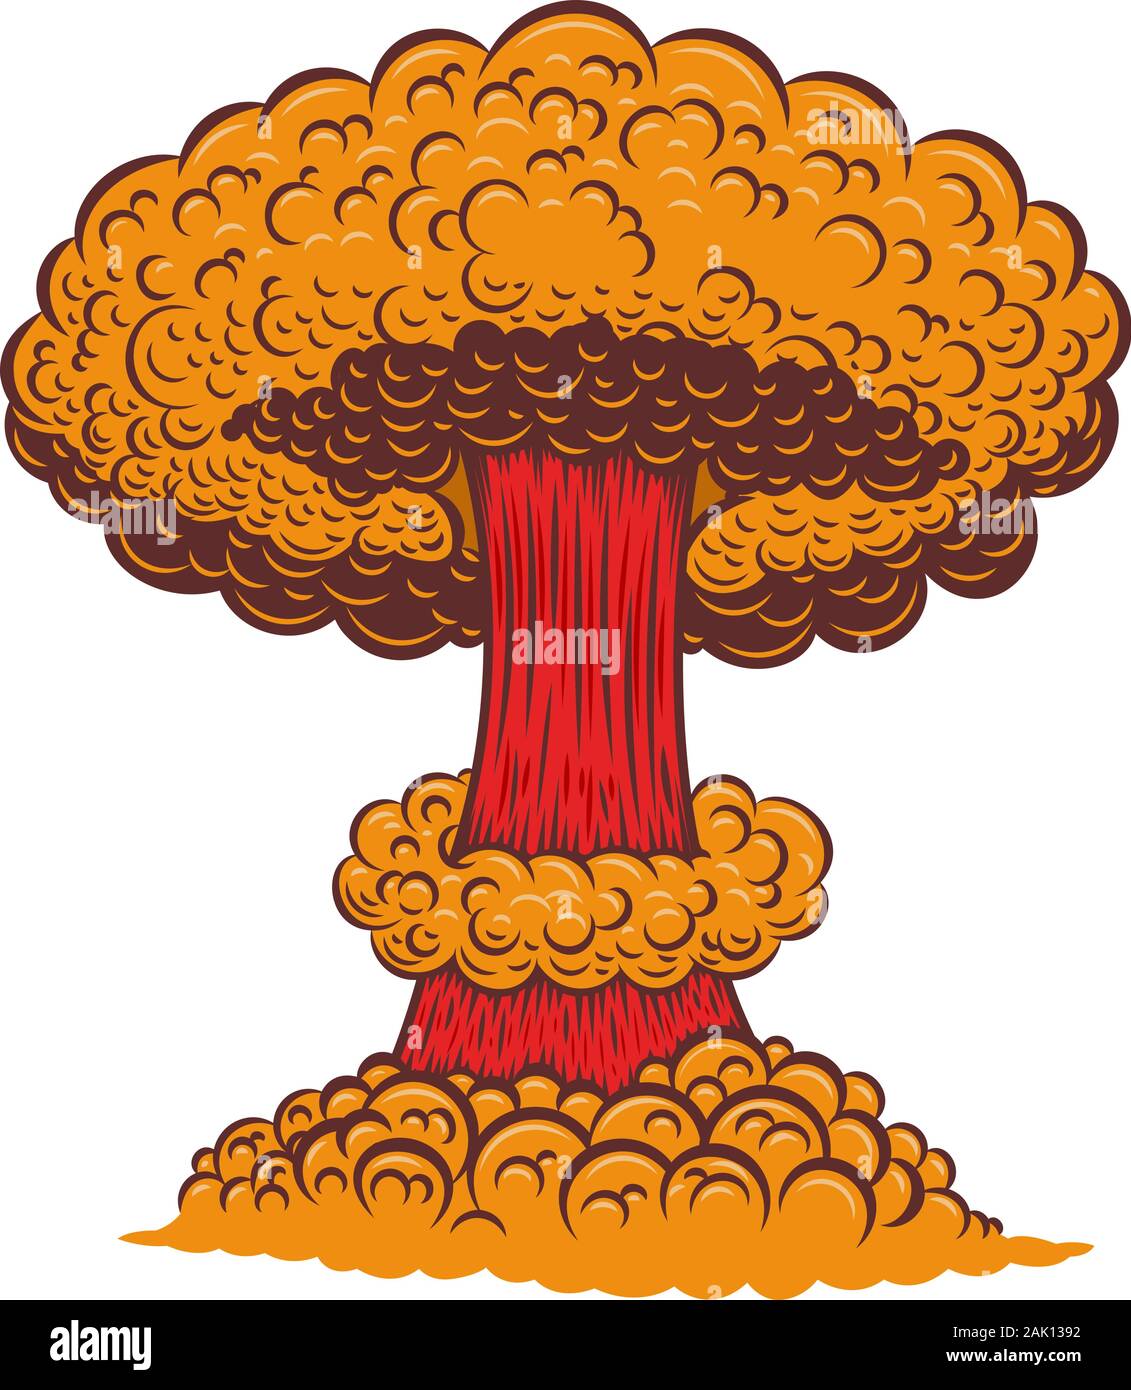 Illustration of atomic bomb explosion in comic style. Design element